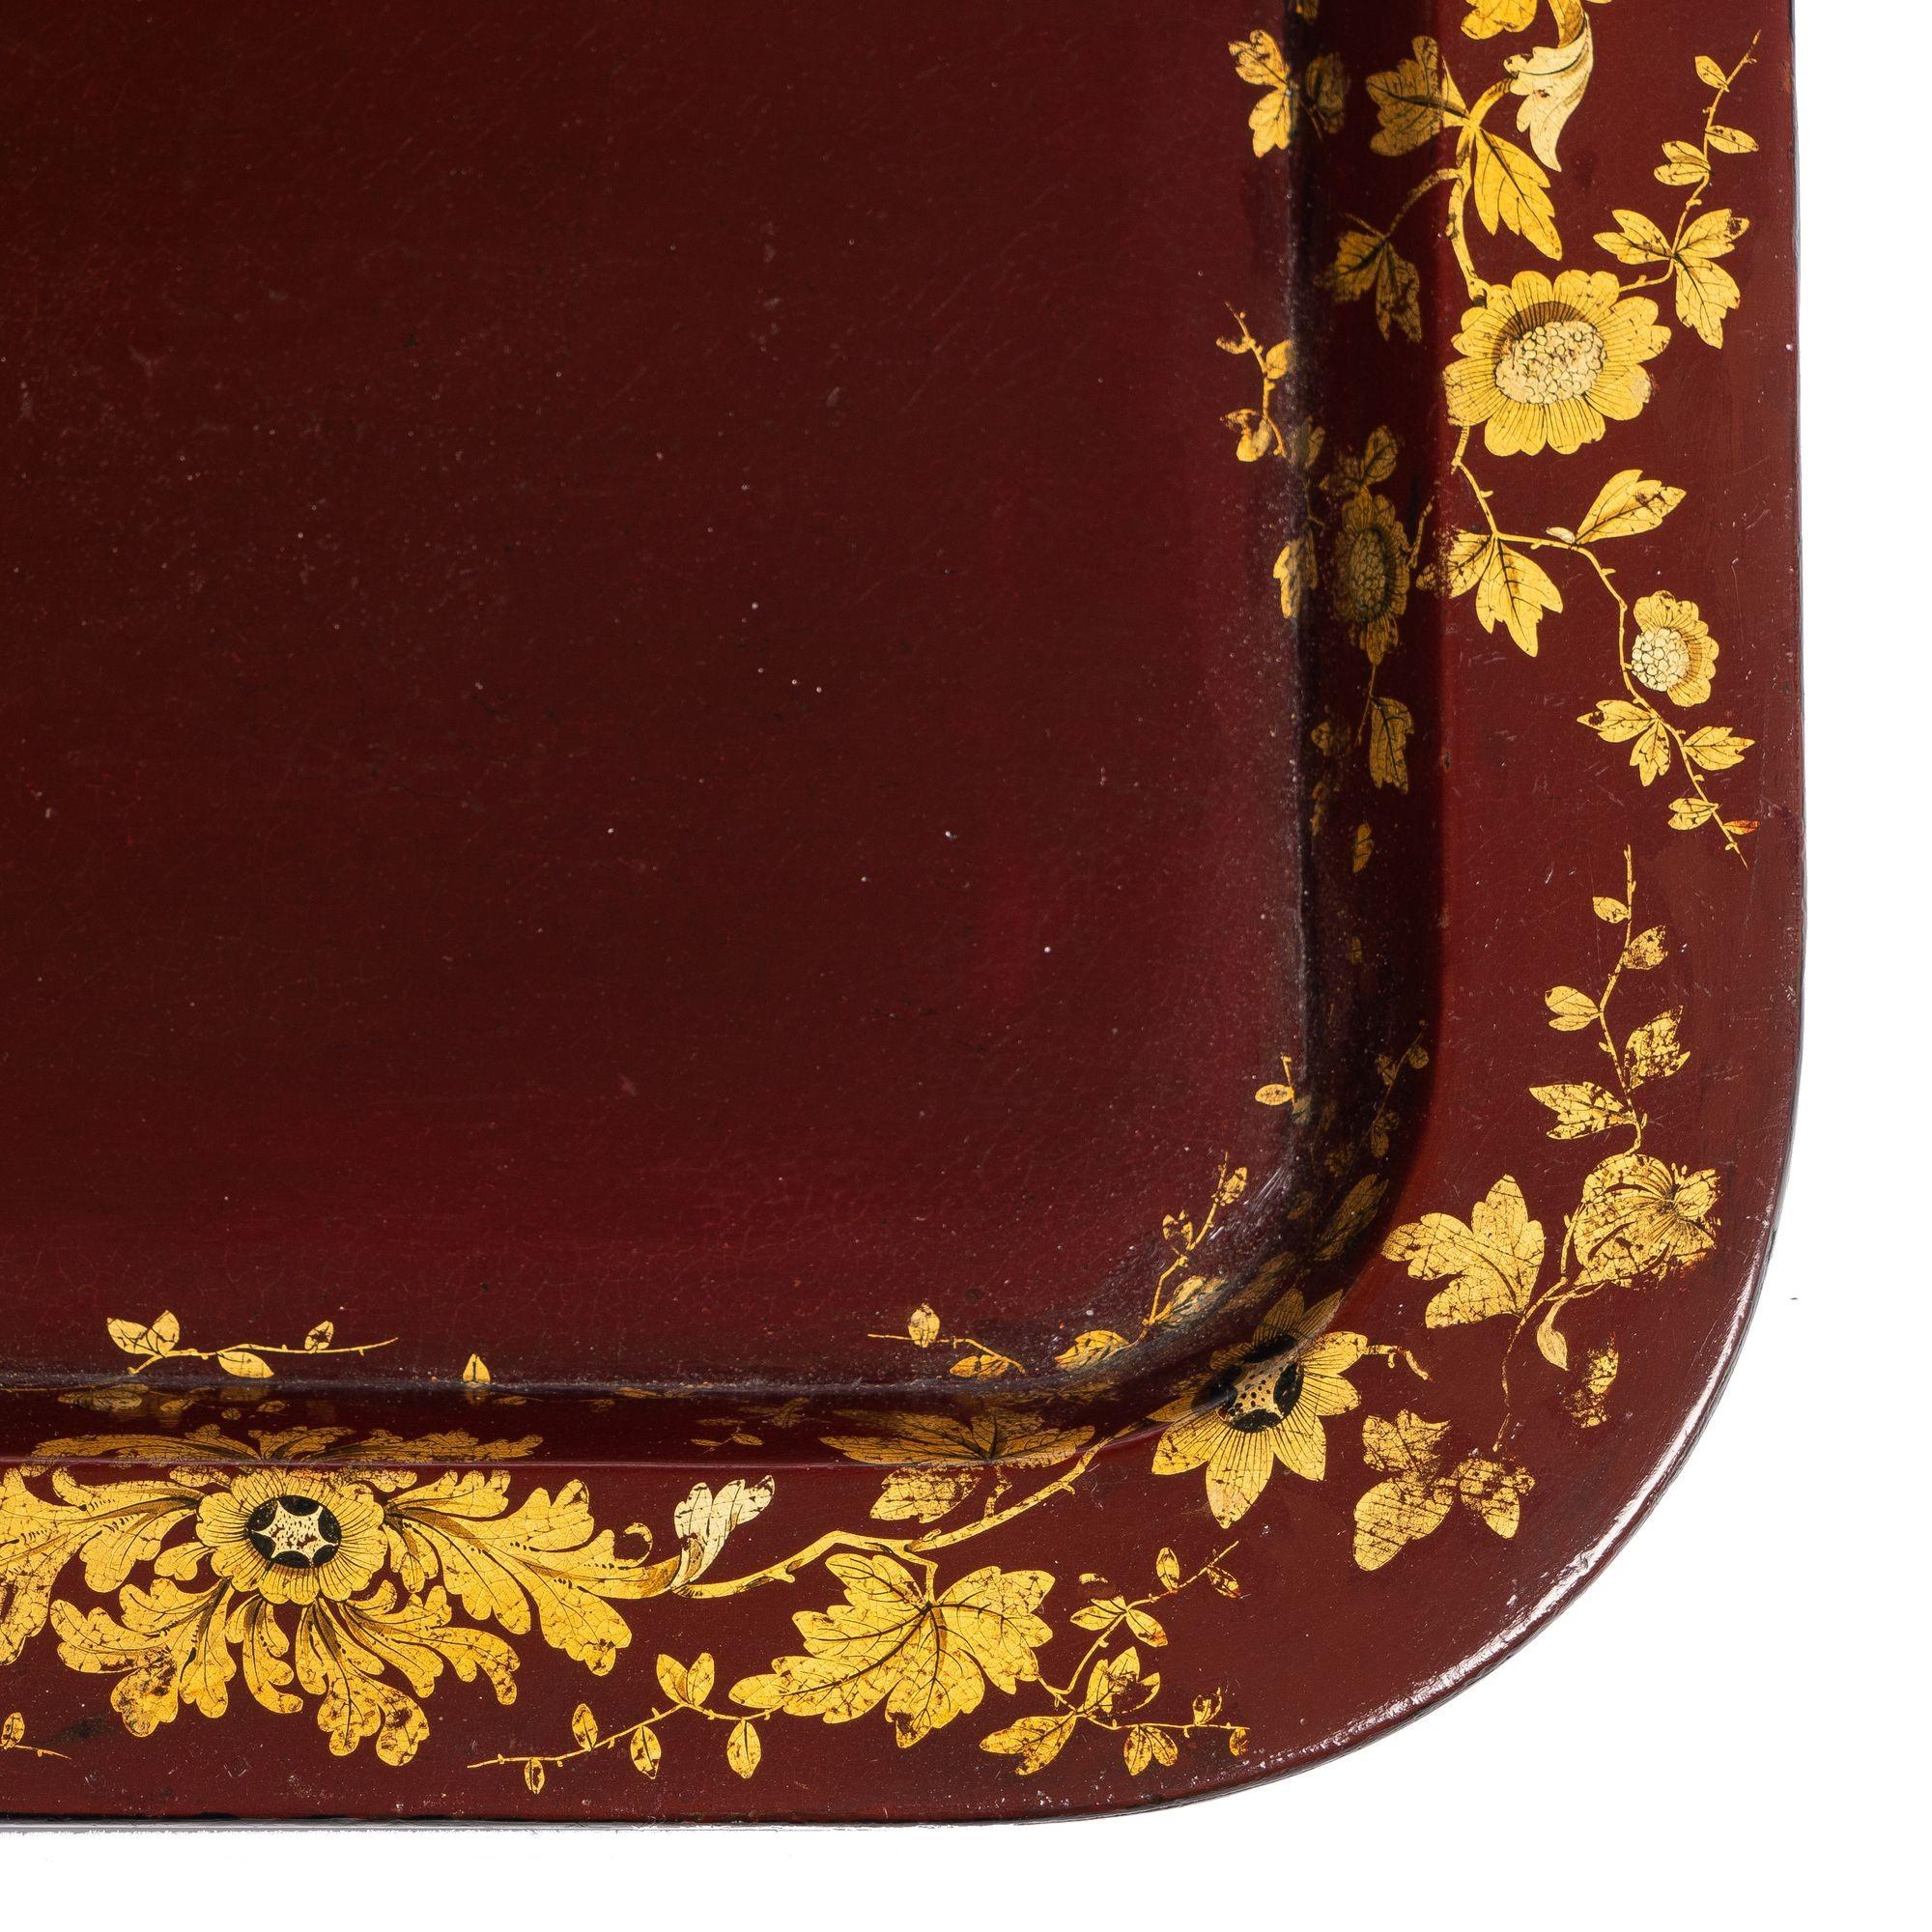 English Gilt Decorated Burgundy Paper Mache Tea Tray on Custom Stand, c. 1830 For Sale 3